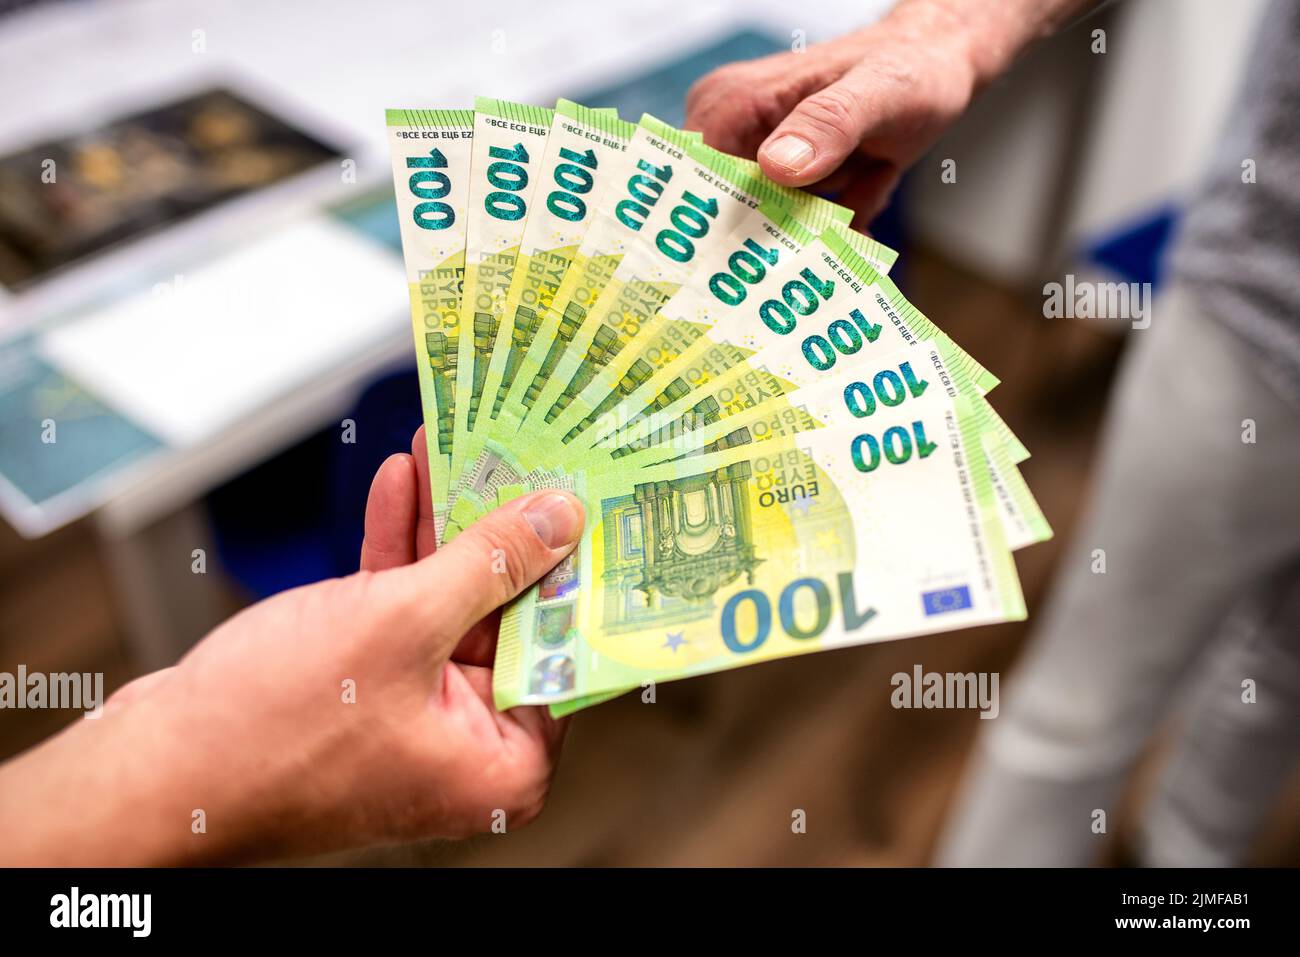 corruption concept. Giving a bribe. Money in hand. Stock Photo